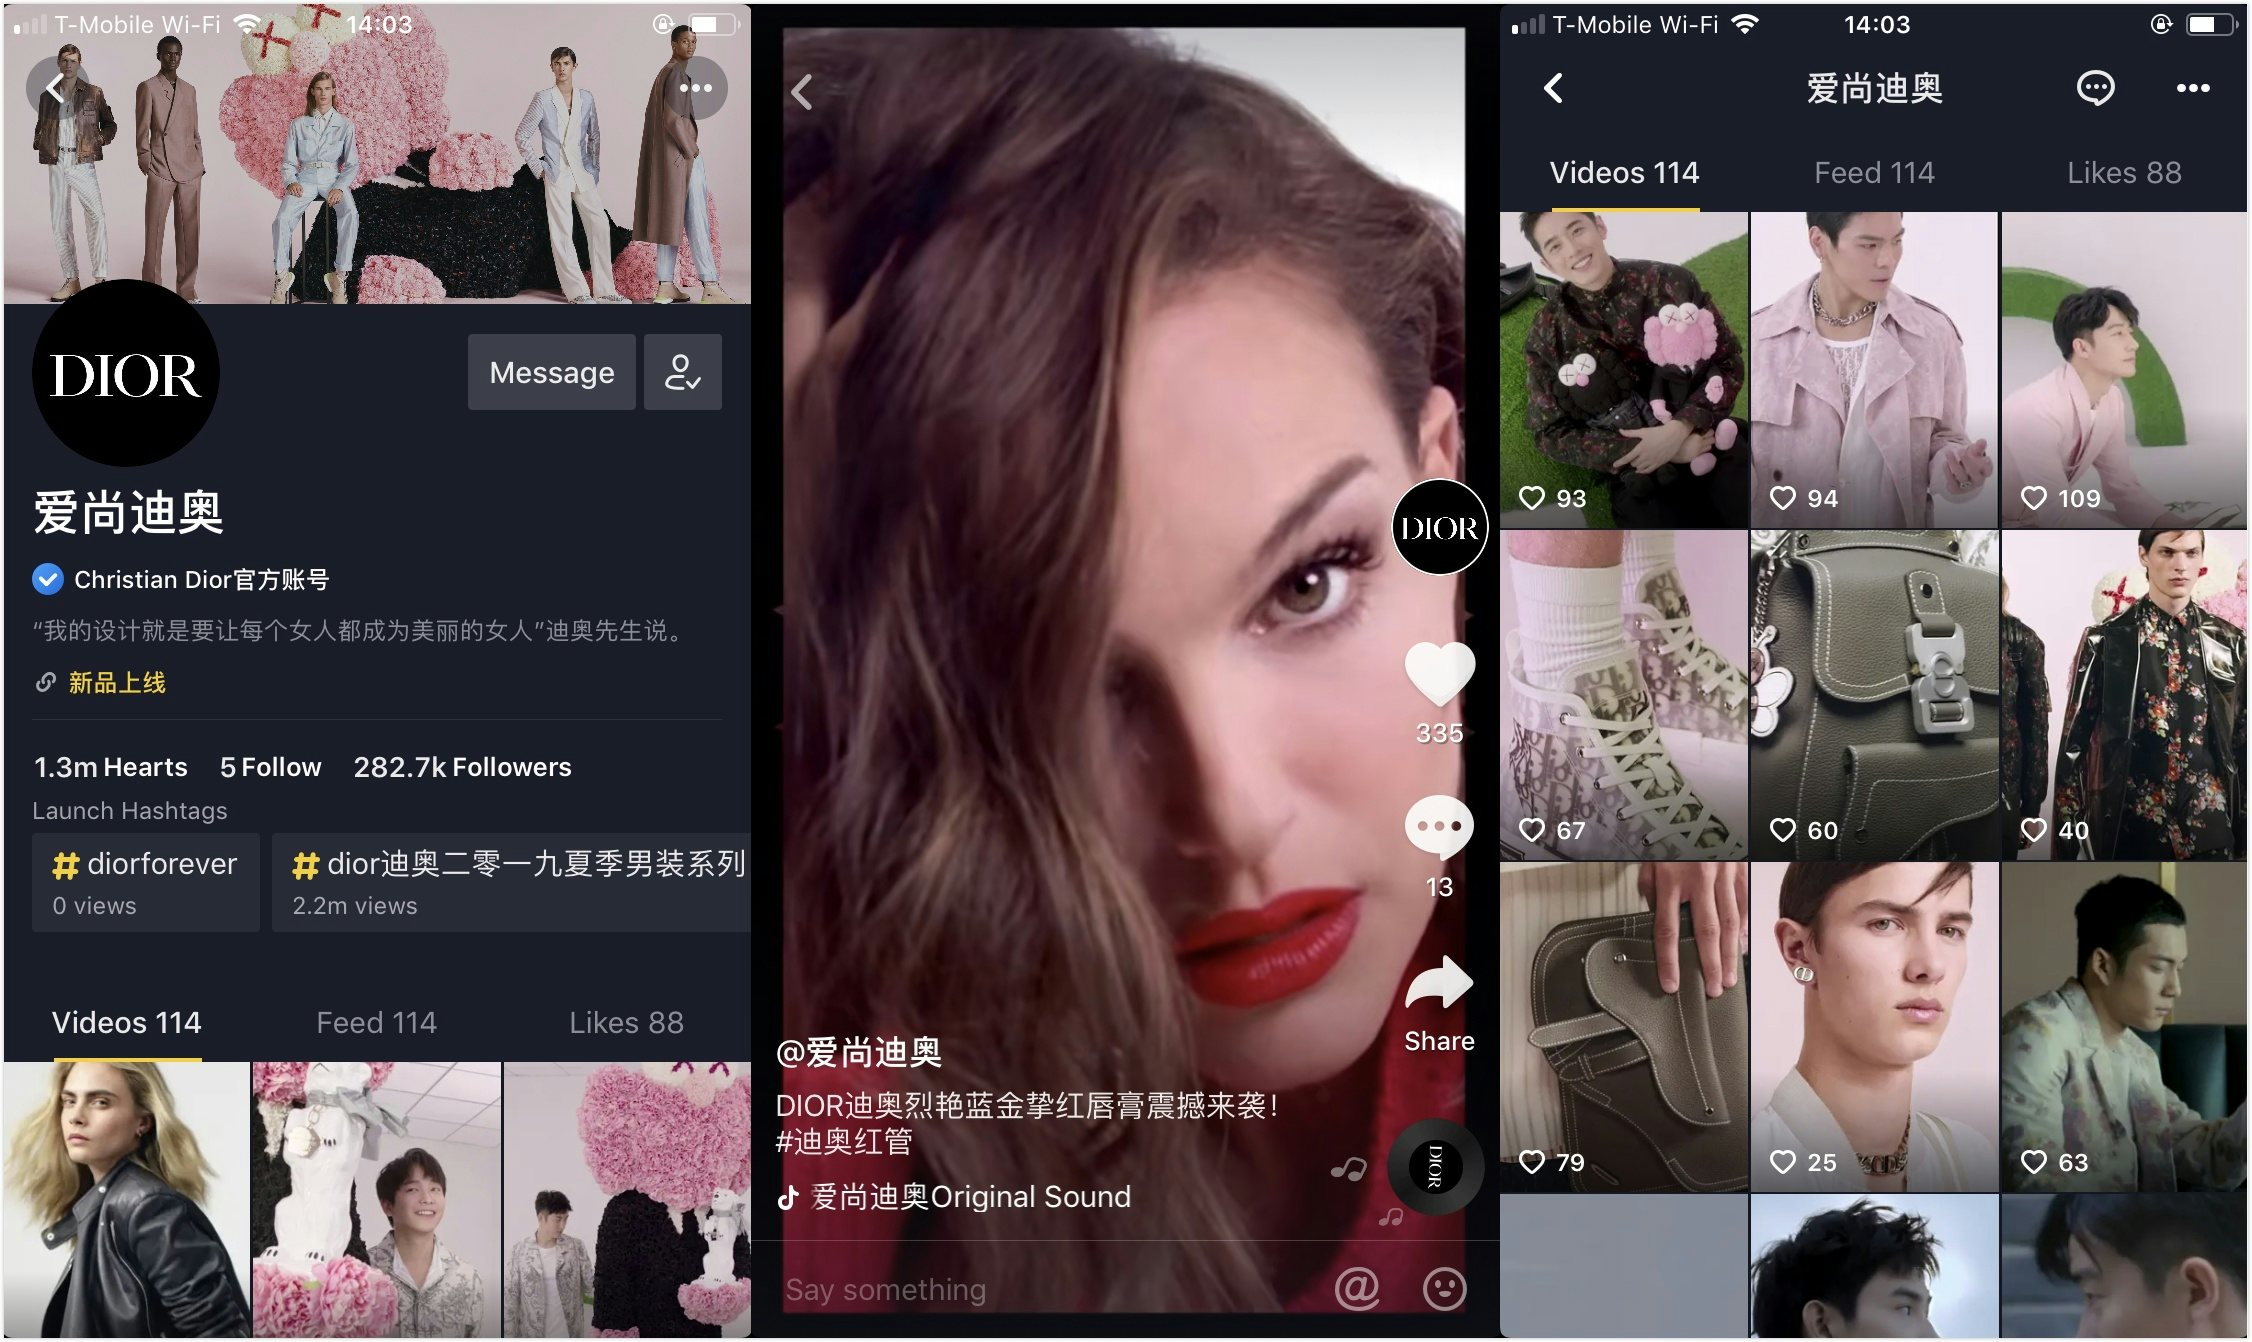 Beyond placing advertisements, Christian Dior has an official account on Douyin whose posting schedule is in sync with the brand’s movements in China. Photo: Jing Daily illustration